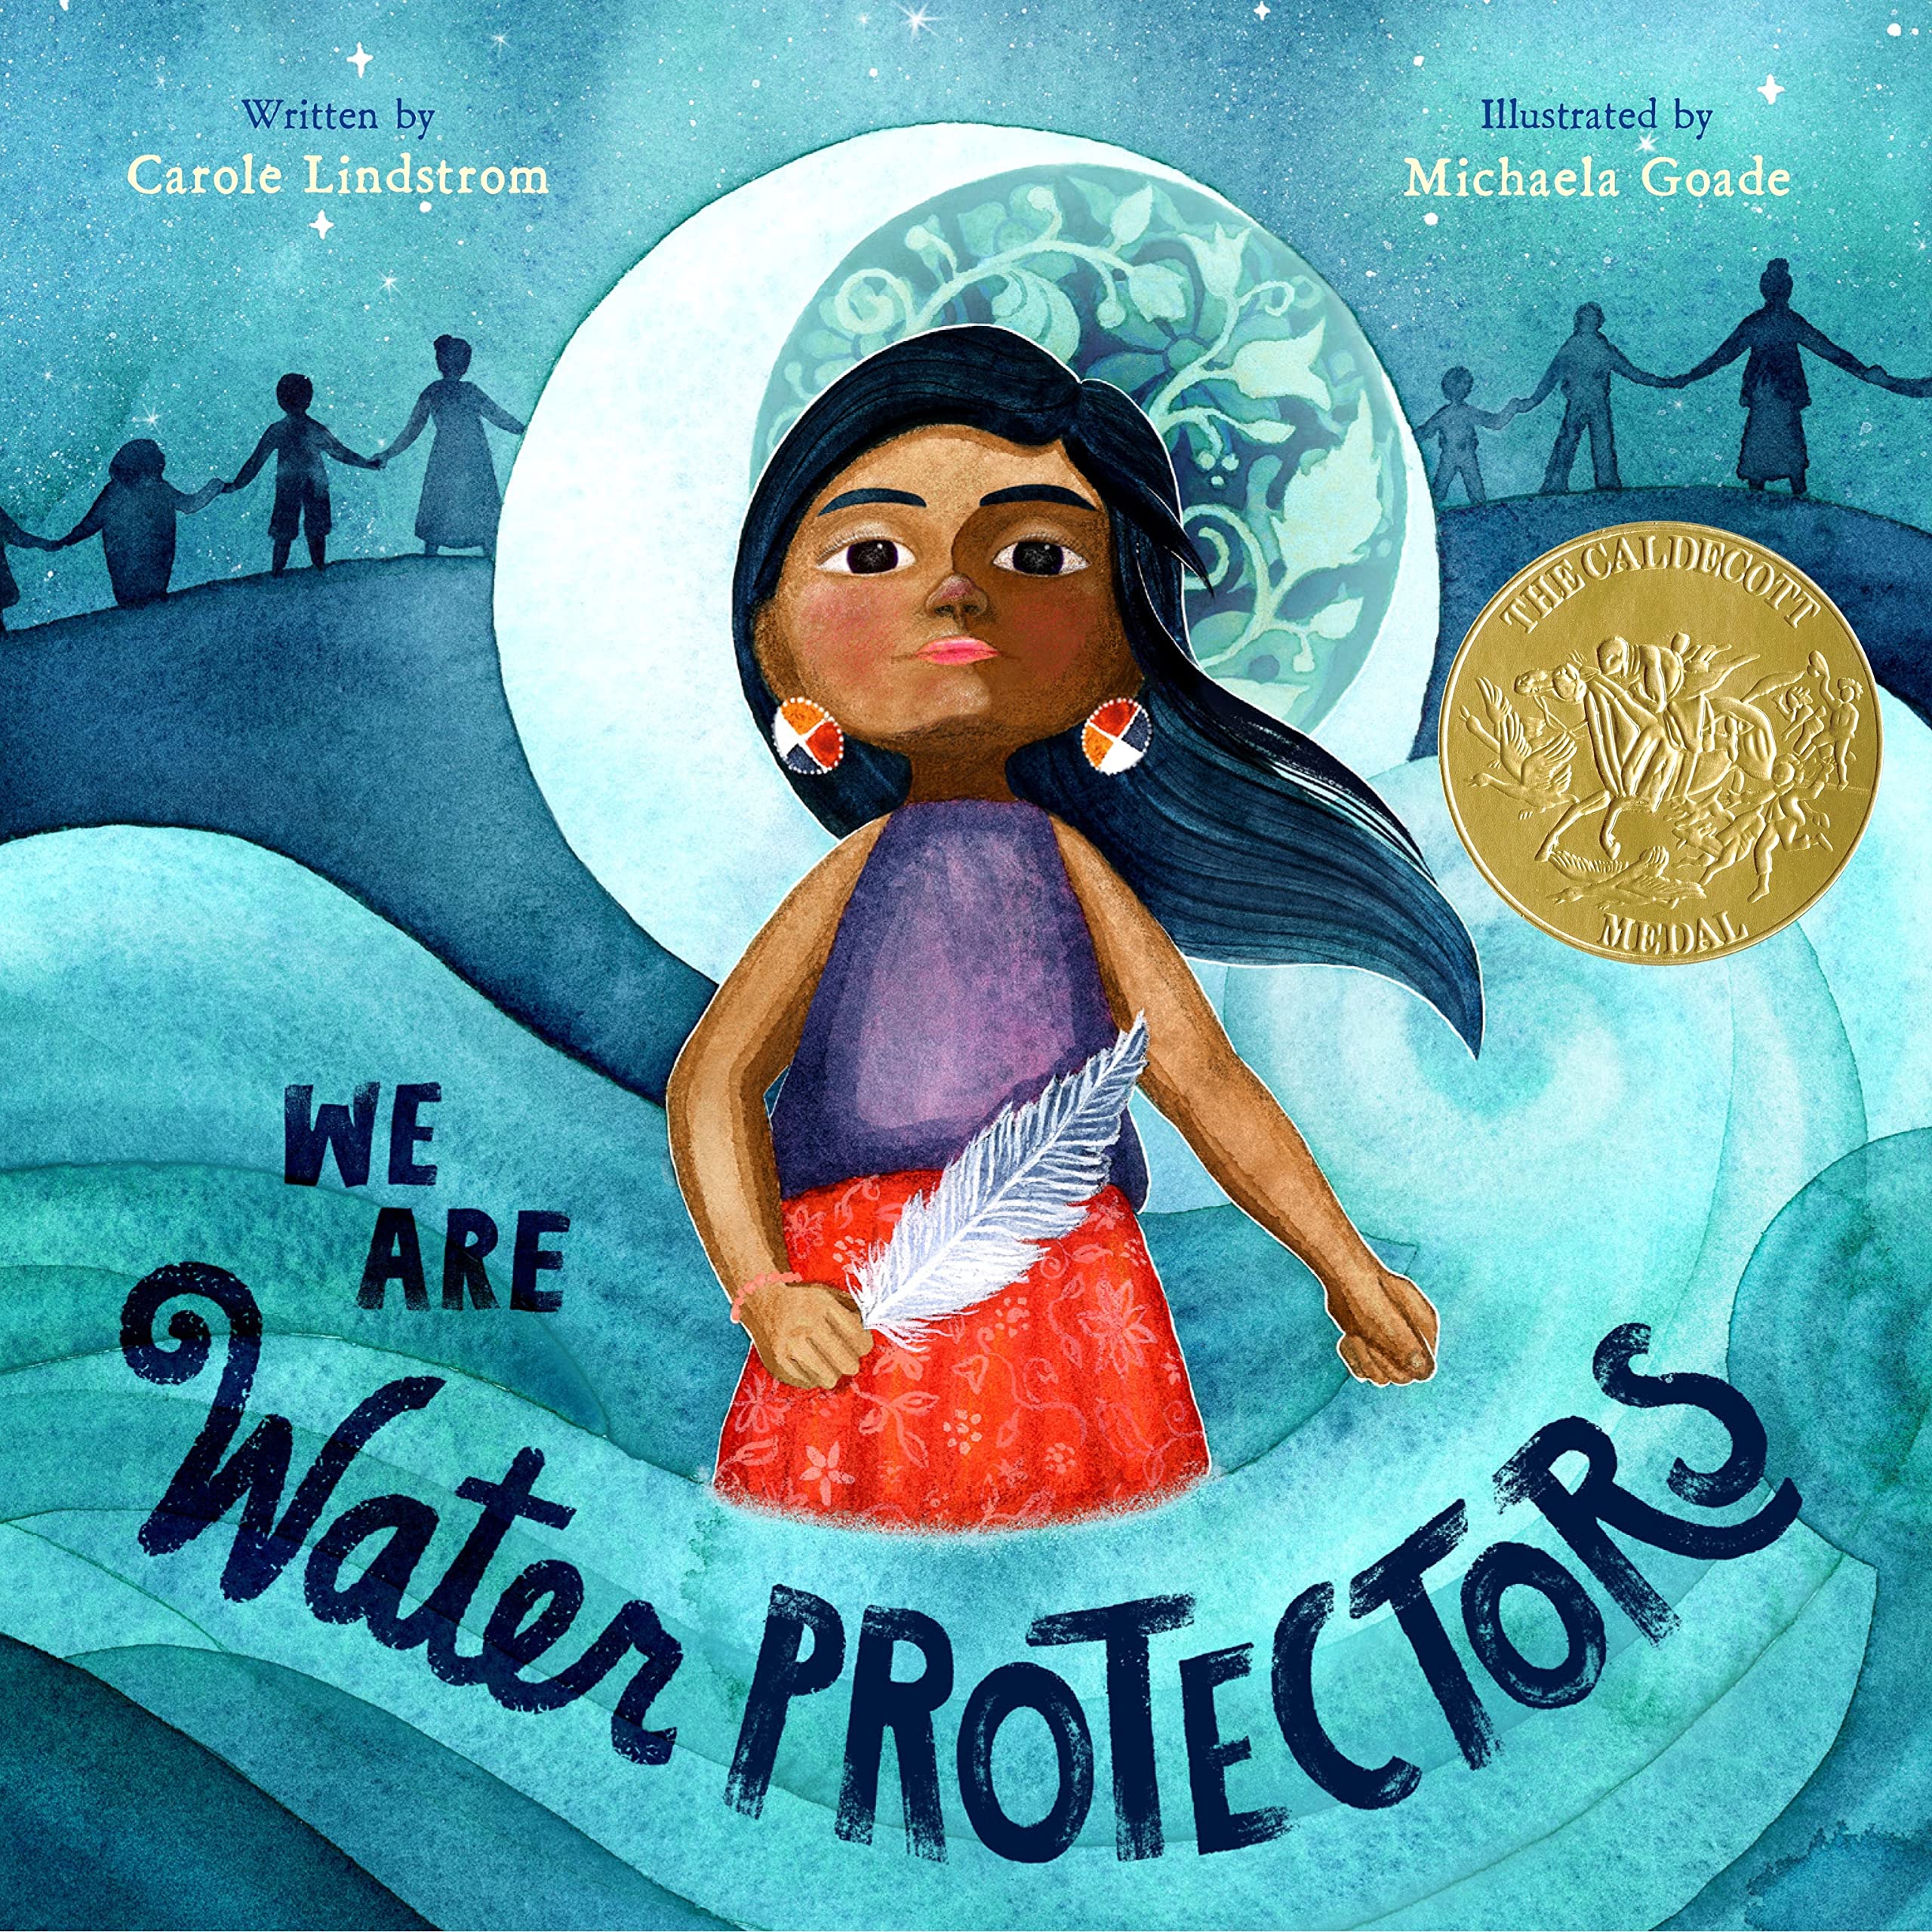 image of the cover of we are waer protectors book